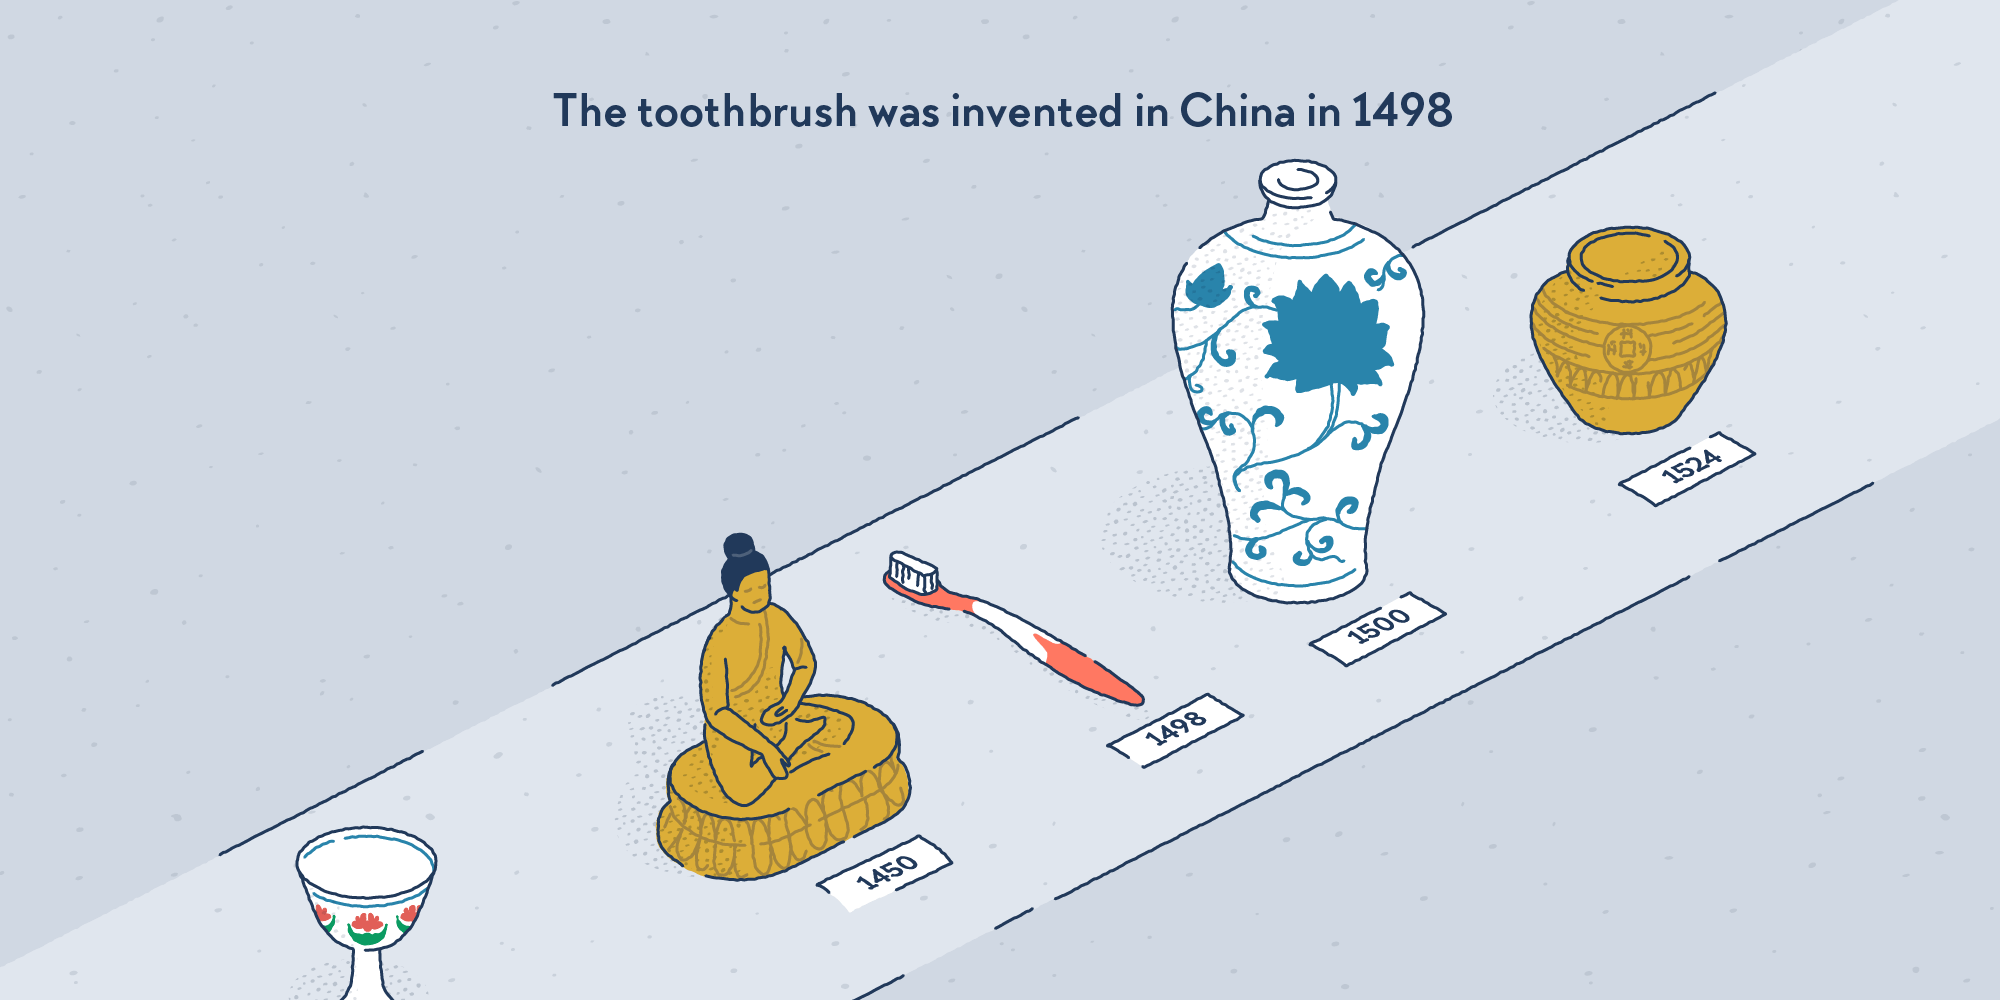 Some old Chinese relics exhibited in a history museum: a vase, a statue… and a toothbrush, looking just like a modern one in the drawing.